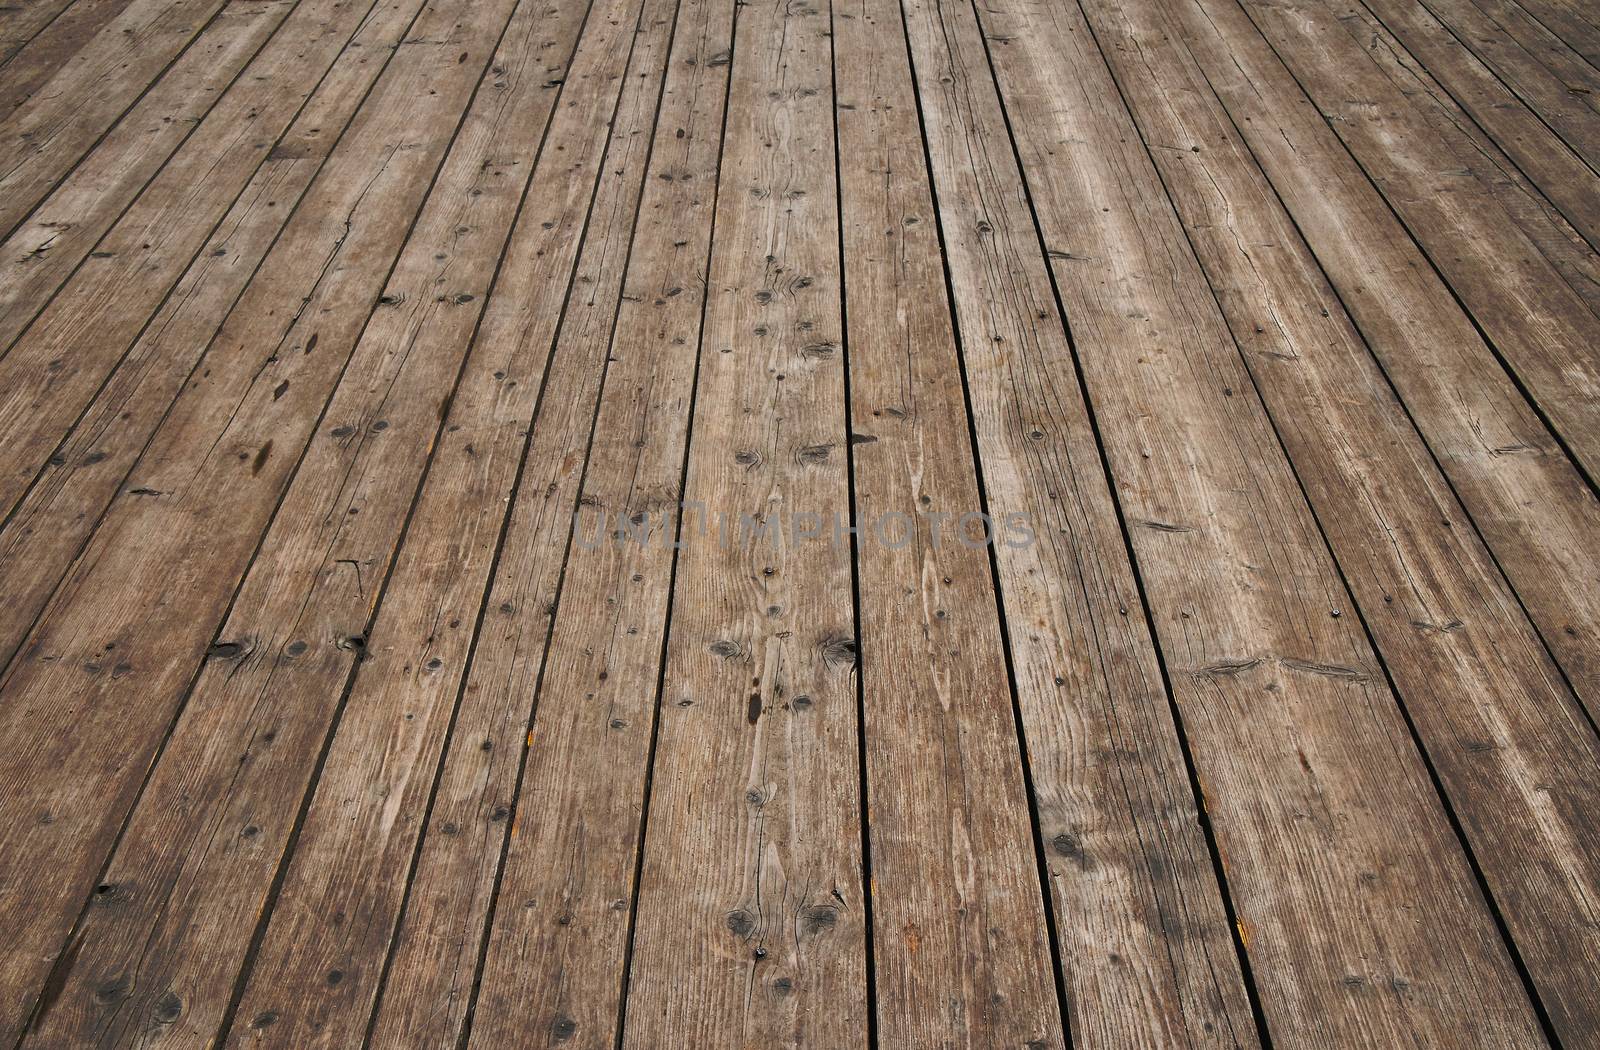 Vintage wooden surface with planks and gaps in perspective by BreakingTheWalls